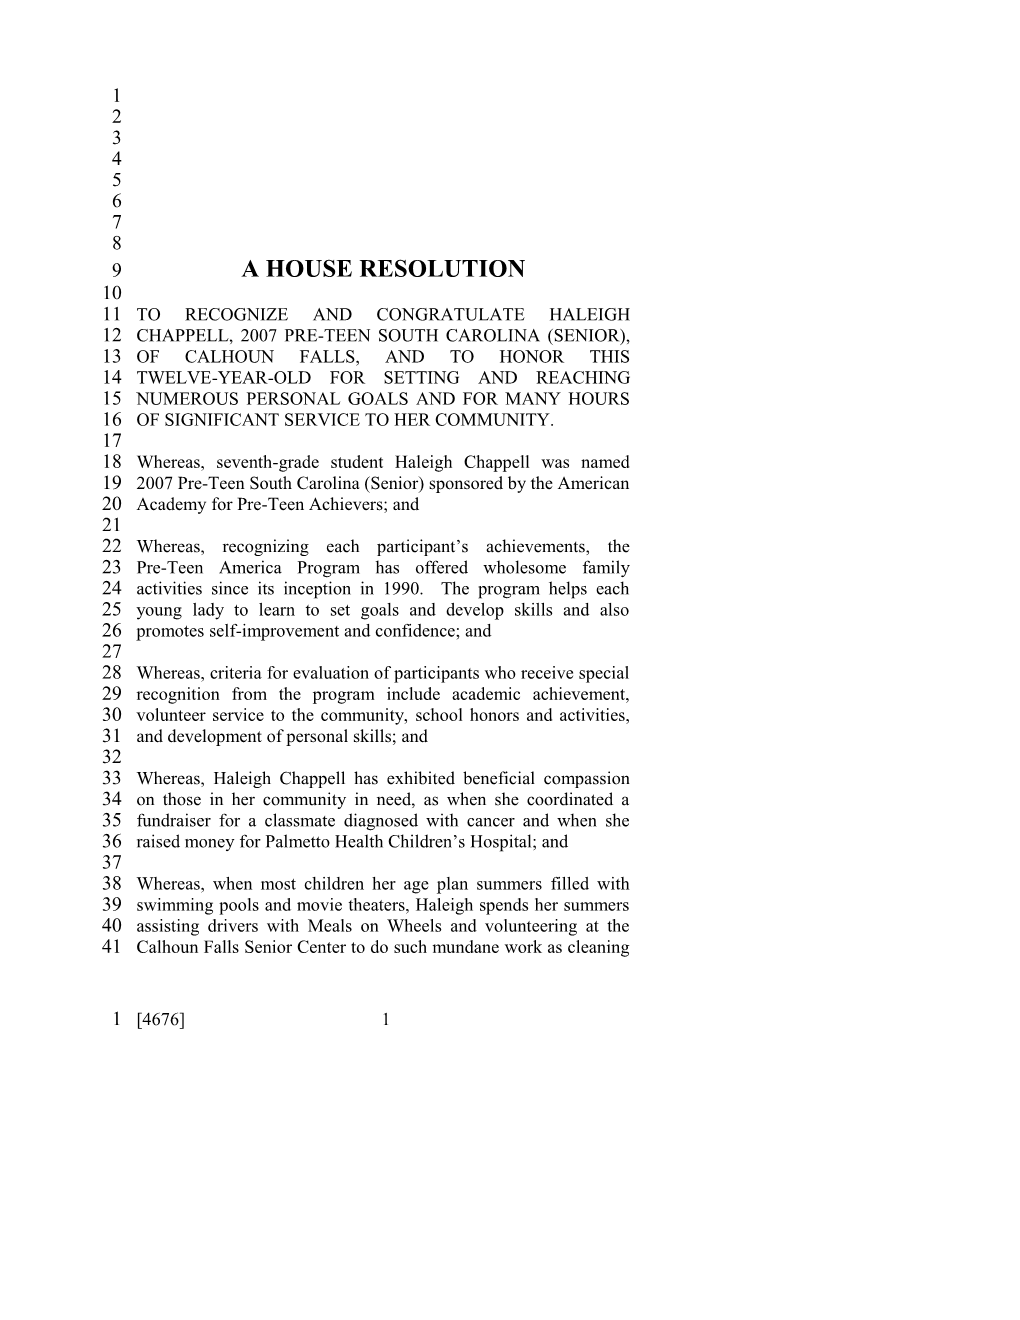 A House Resolution s18